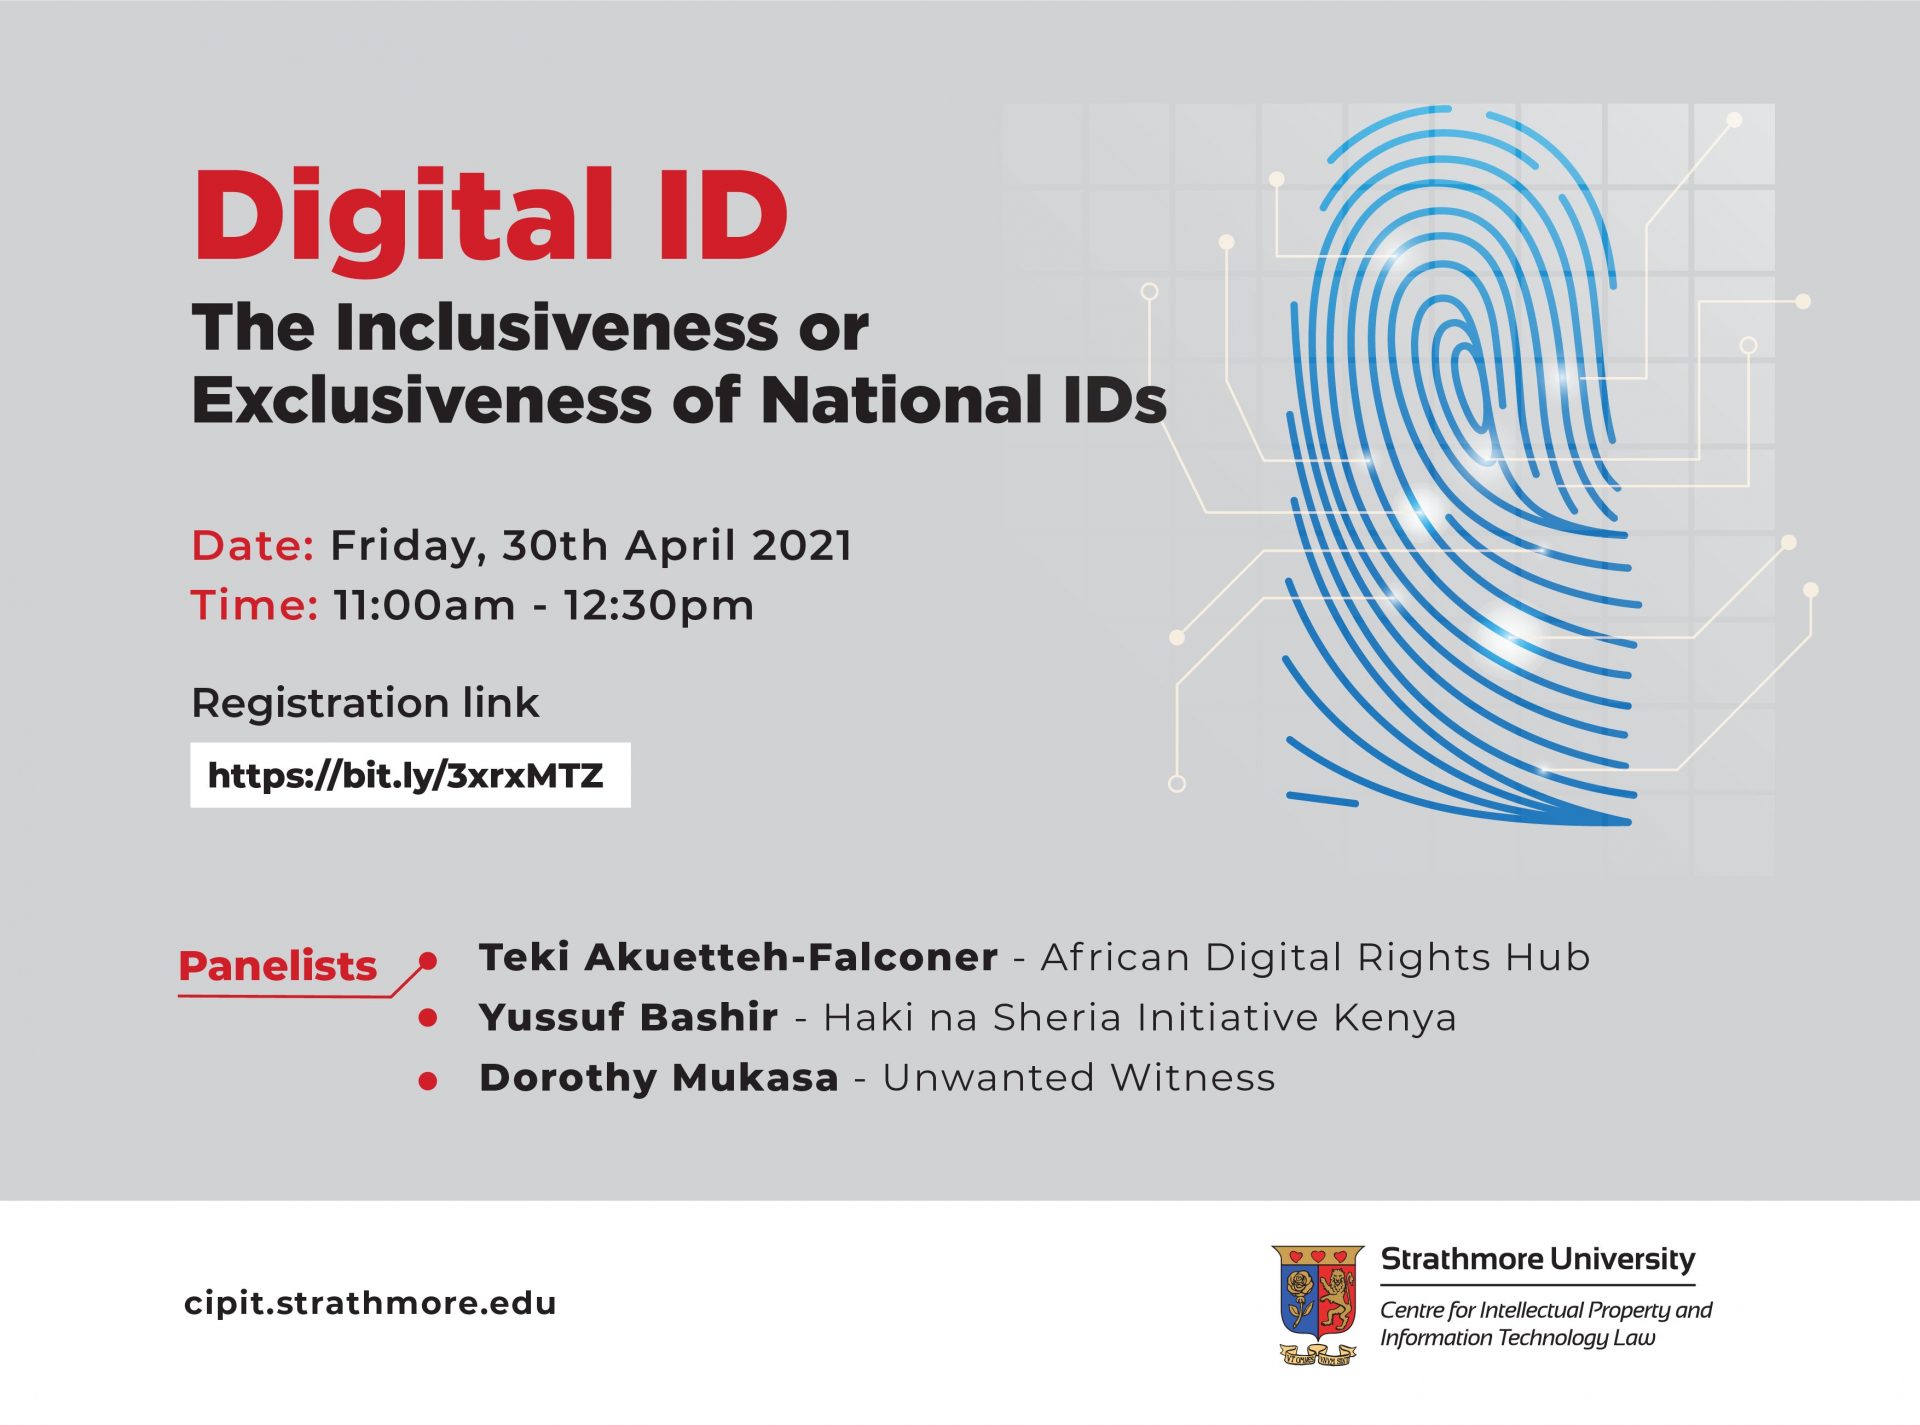 Digital ID: The Inclusiveness or Exclusiveness of National IDs